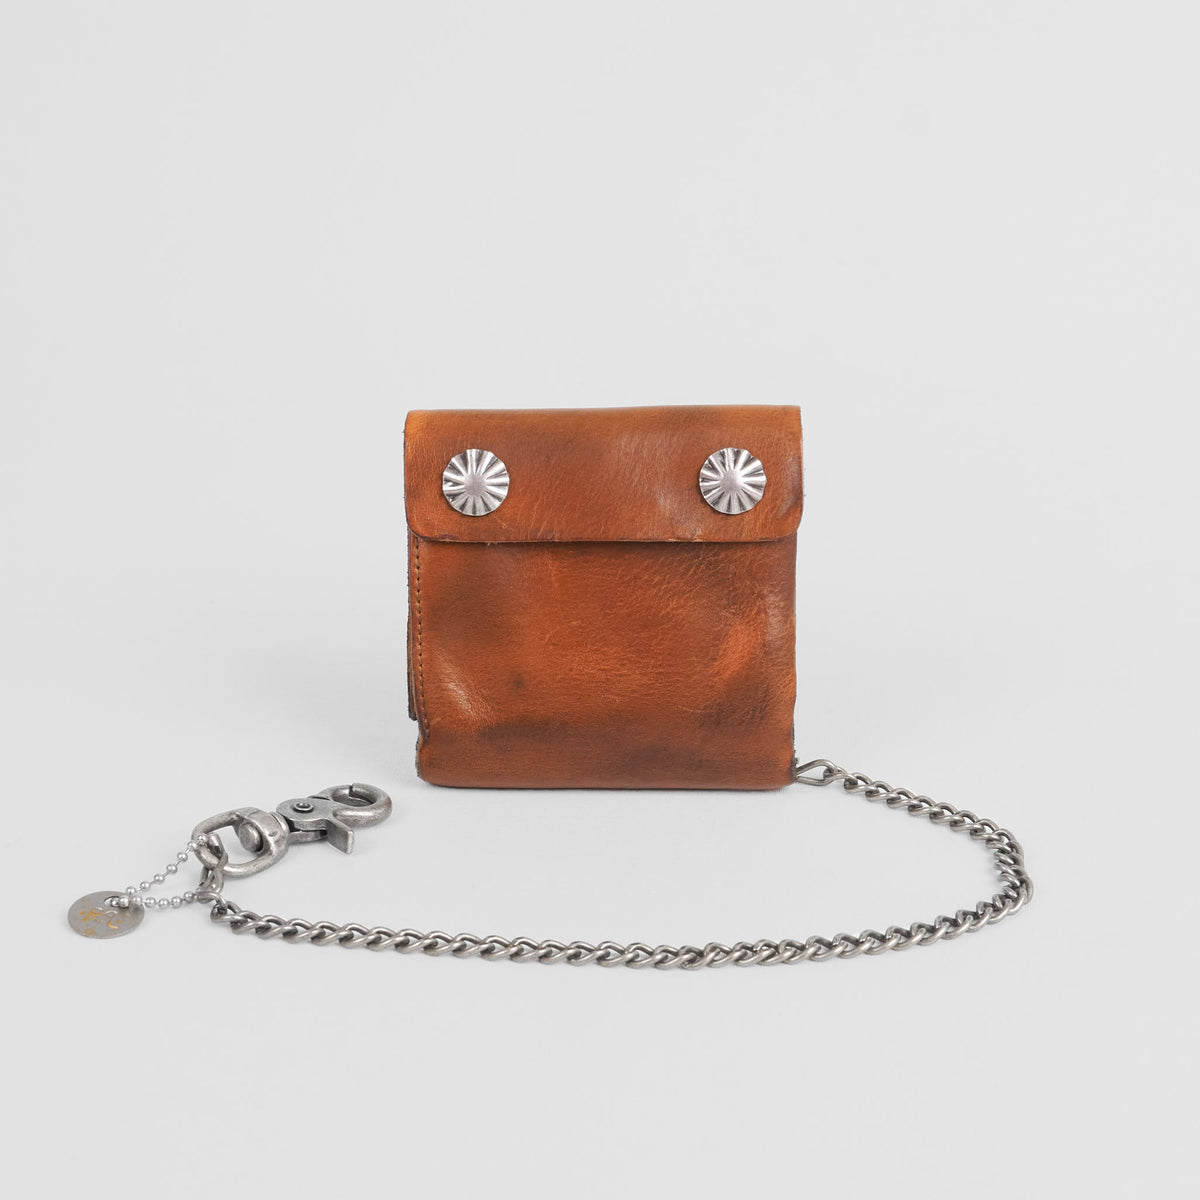 Double RL Concho Leather Chain Wallet in Dark Brown